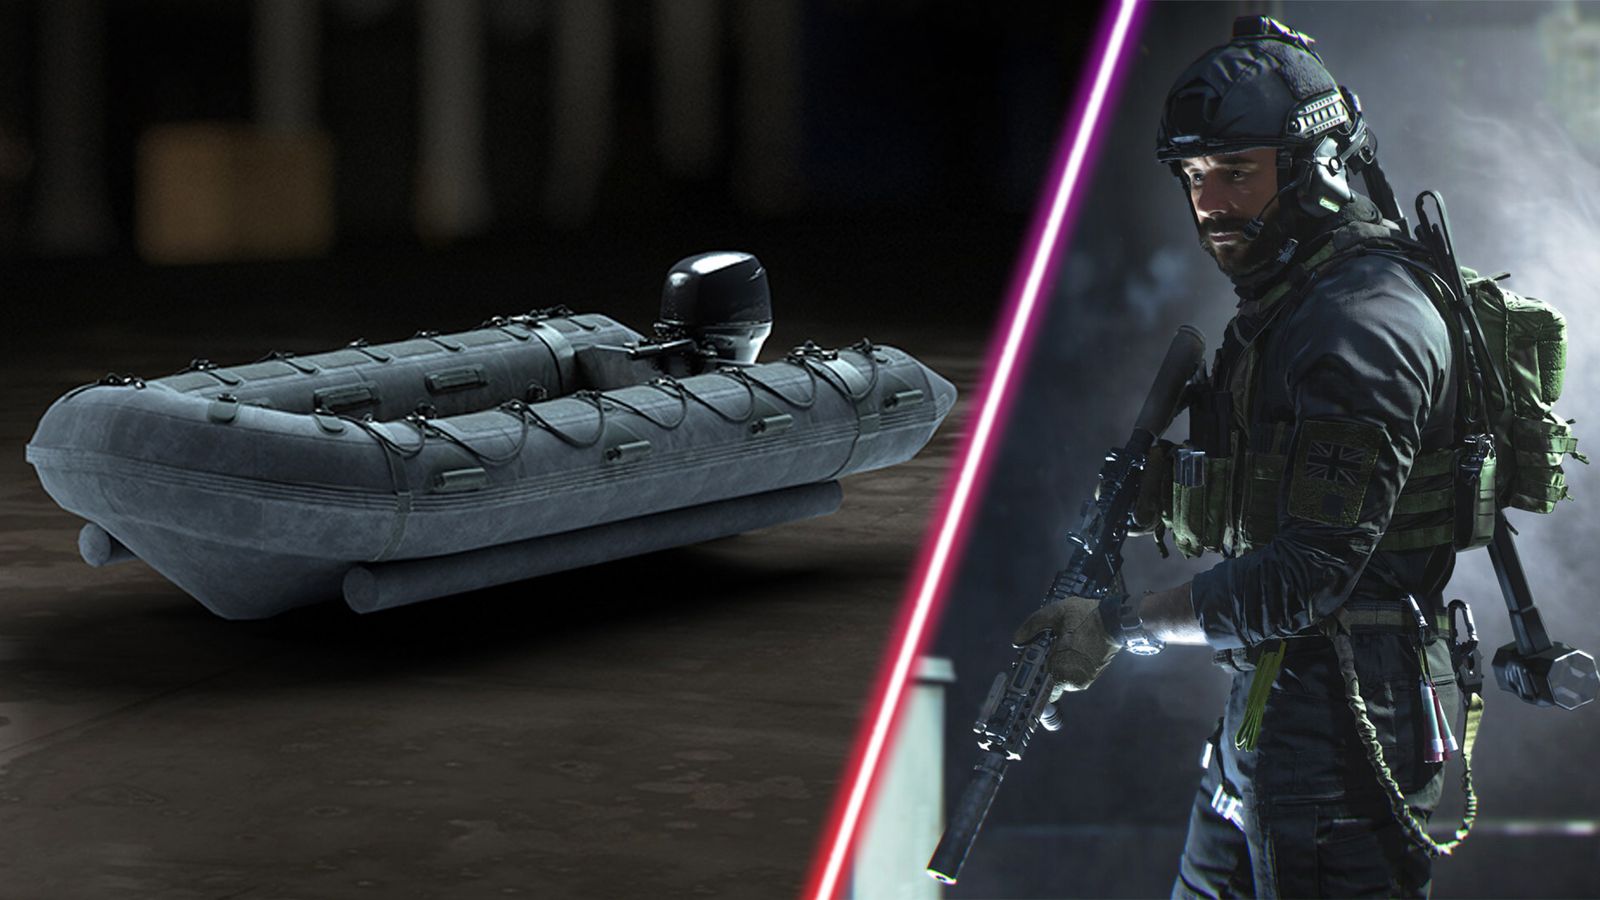 Warzone RHIB boat and Captain Price pointing gun to ground